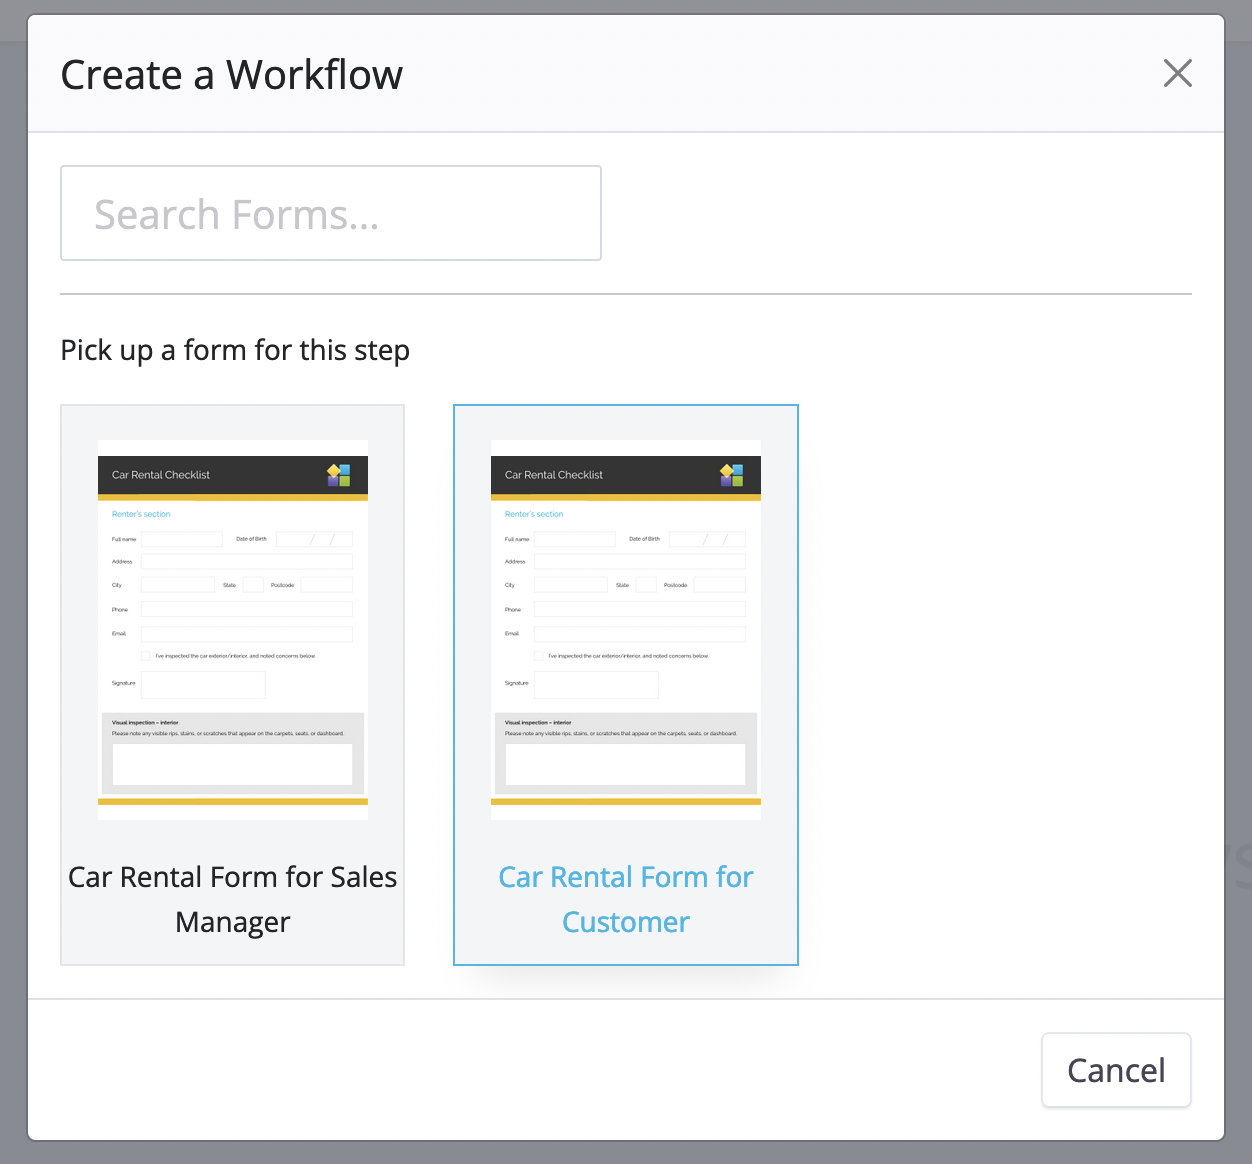 Select workflow step 1